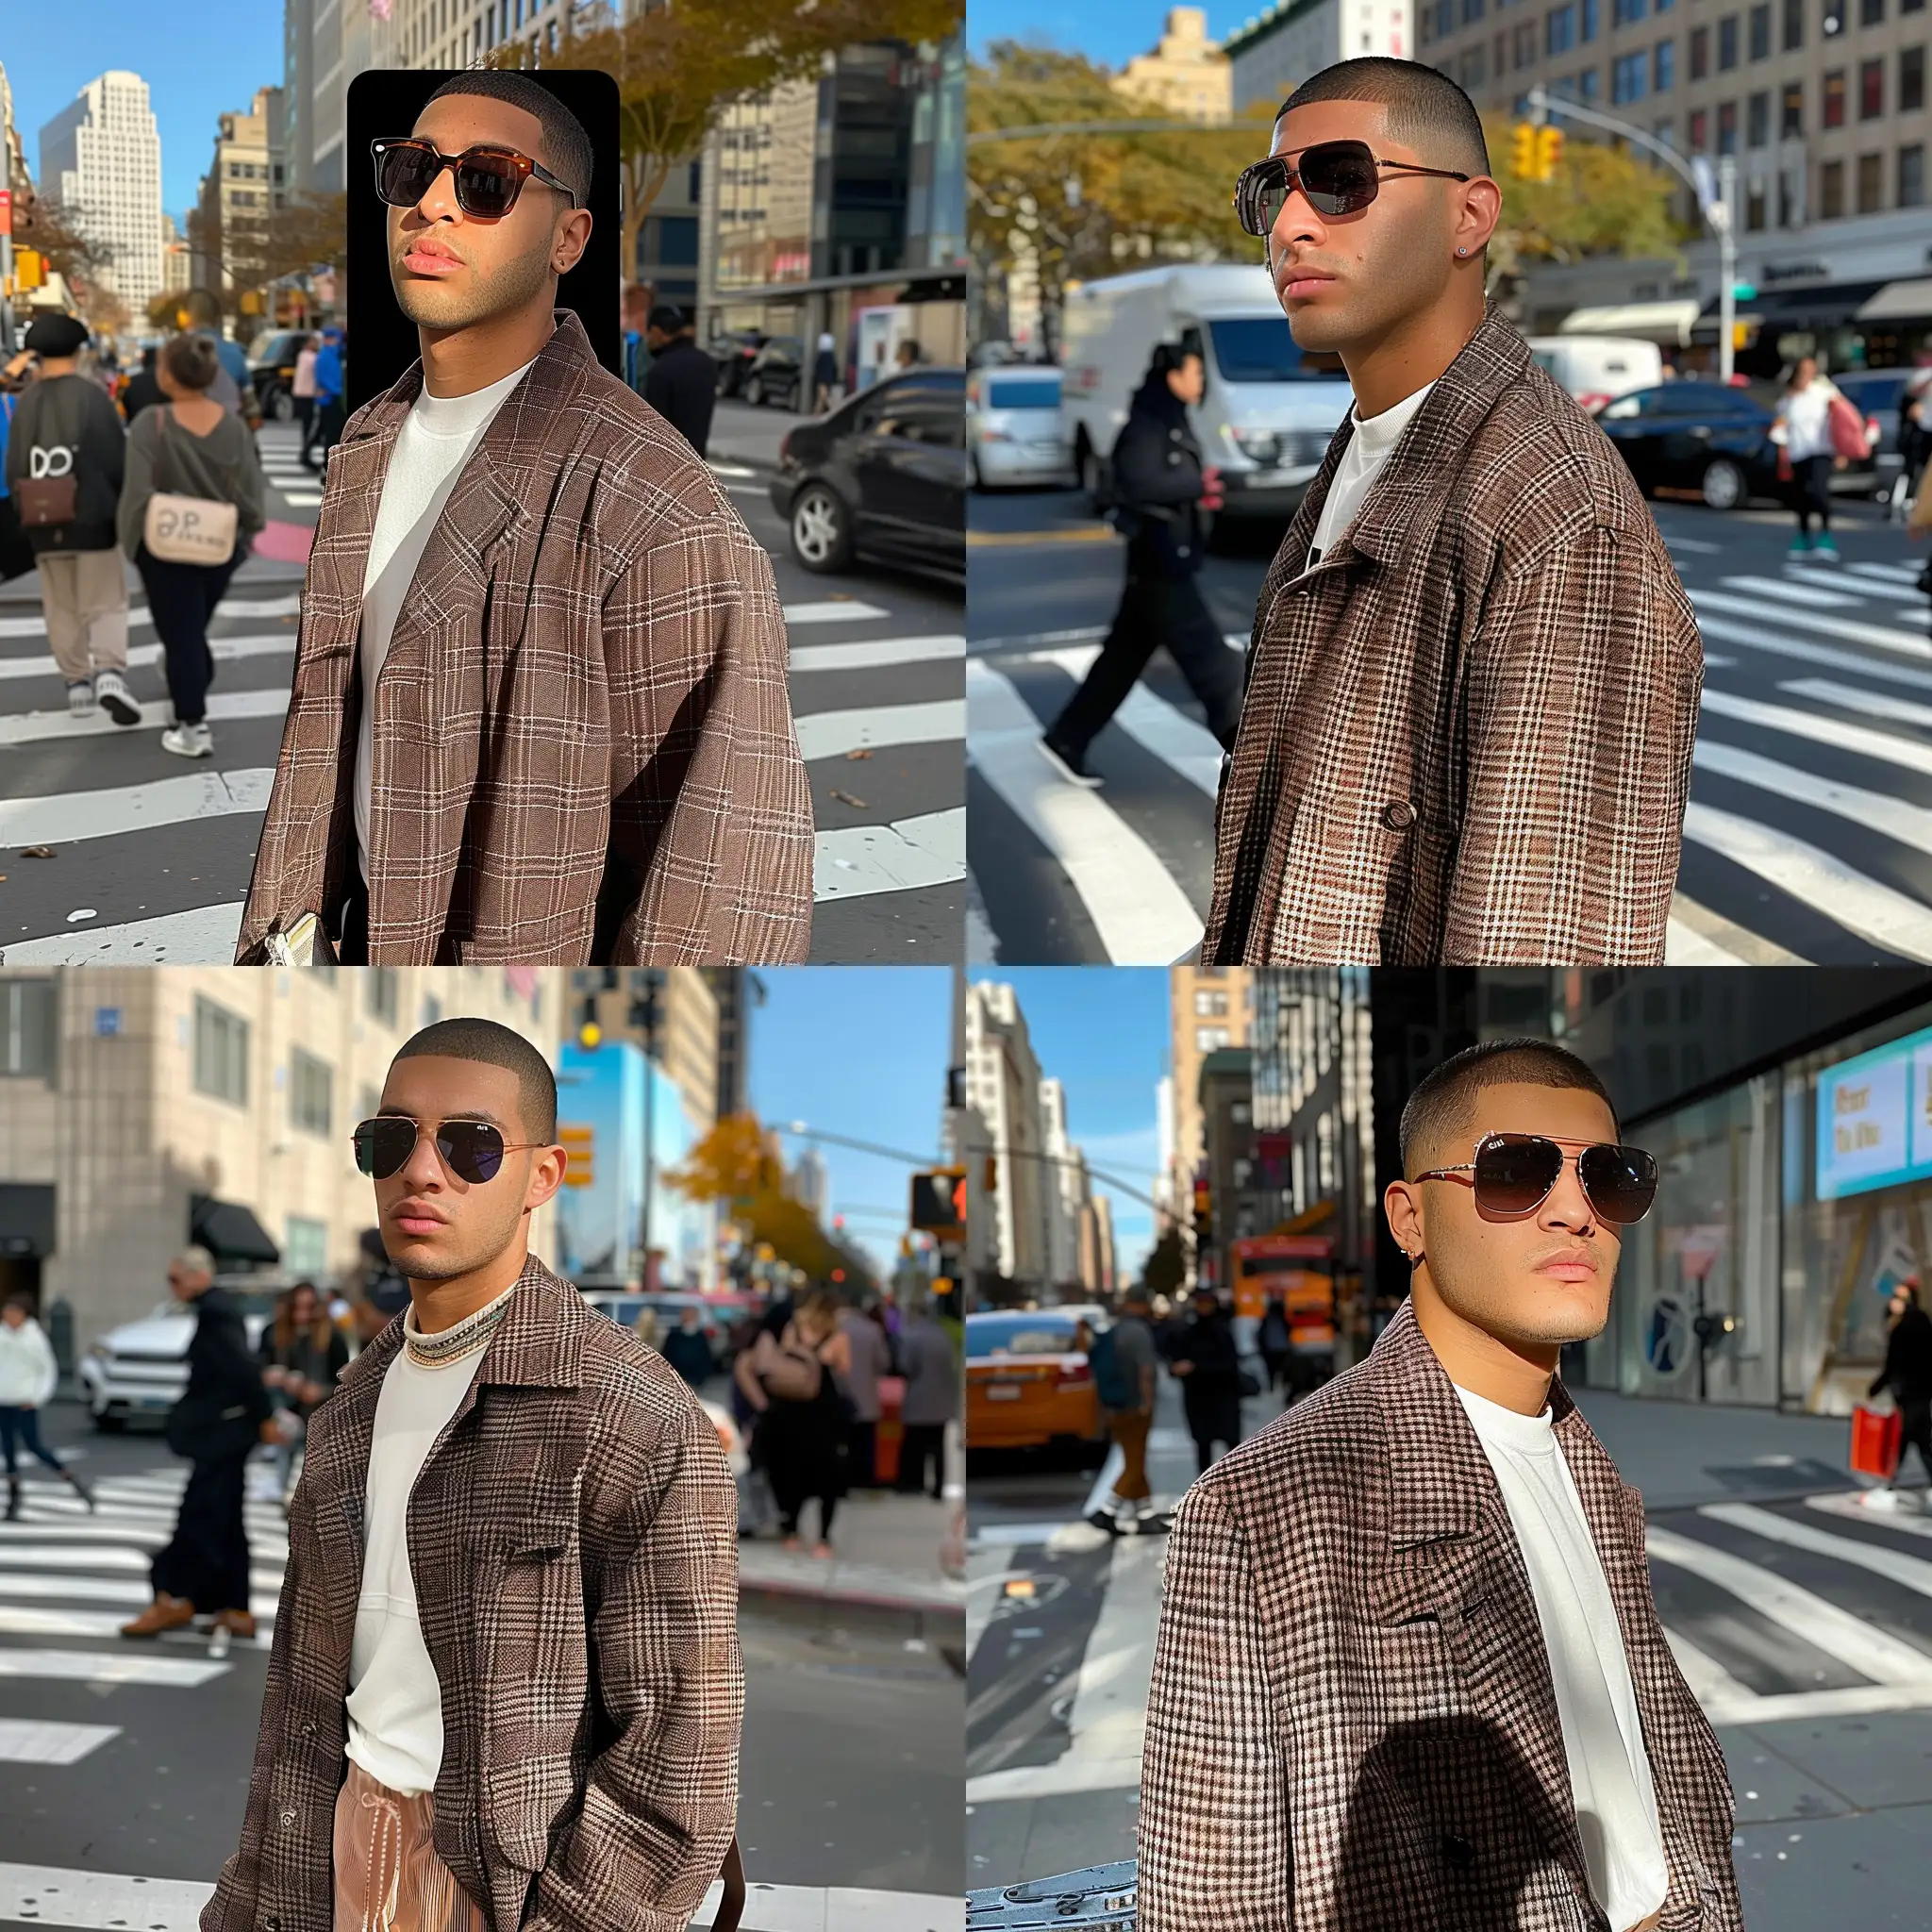 Young-Man-with-Buzz-Cut-and-Sunglasses-in-Urban-Setting